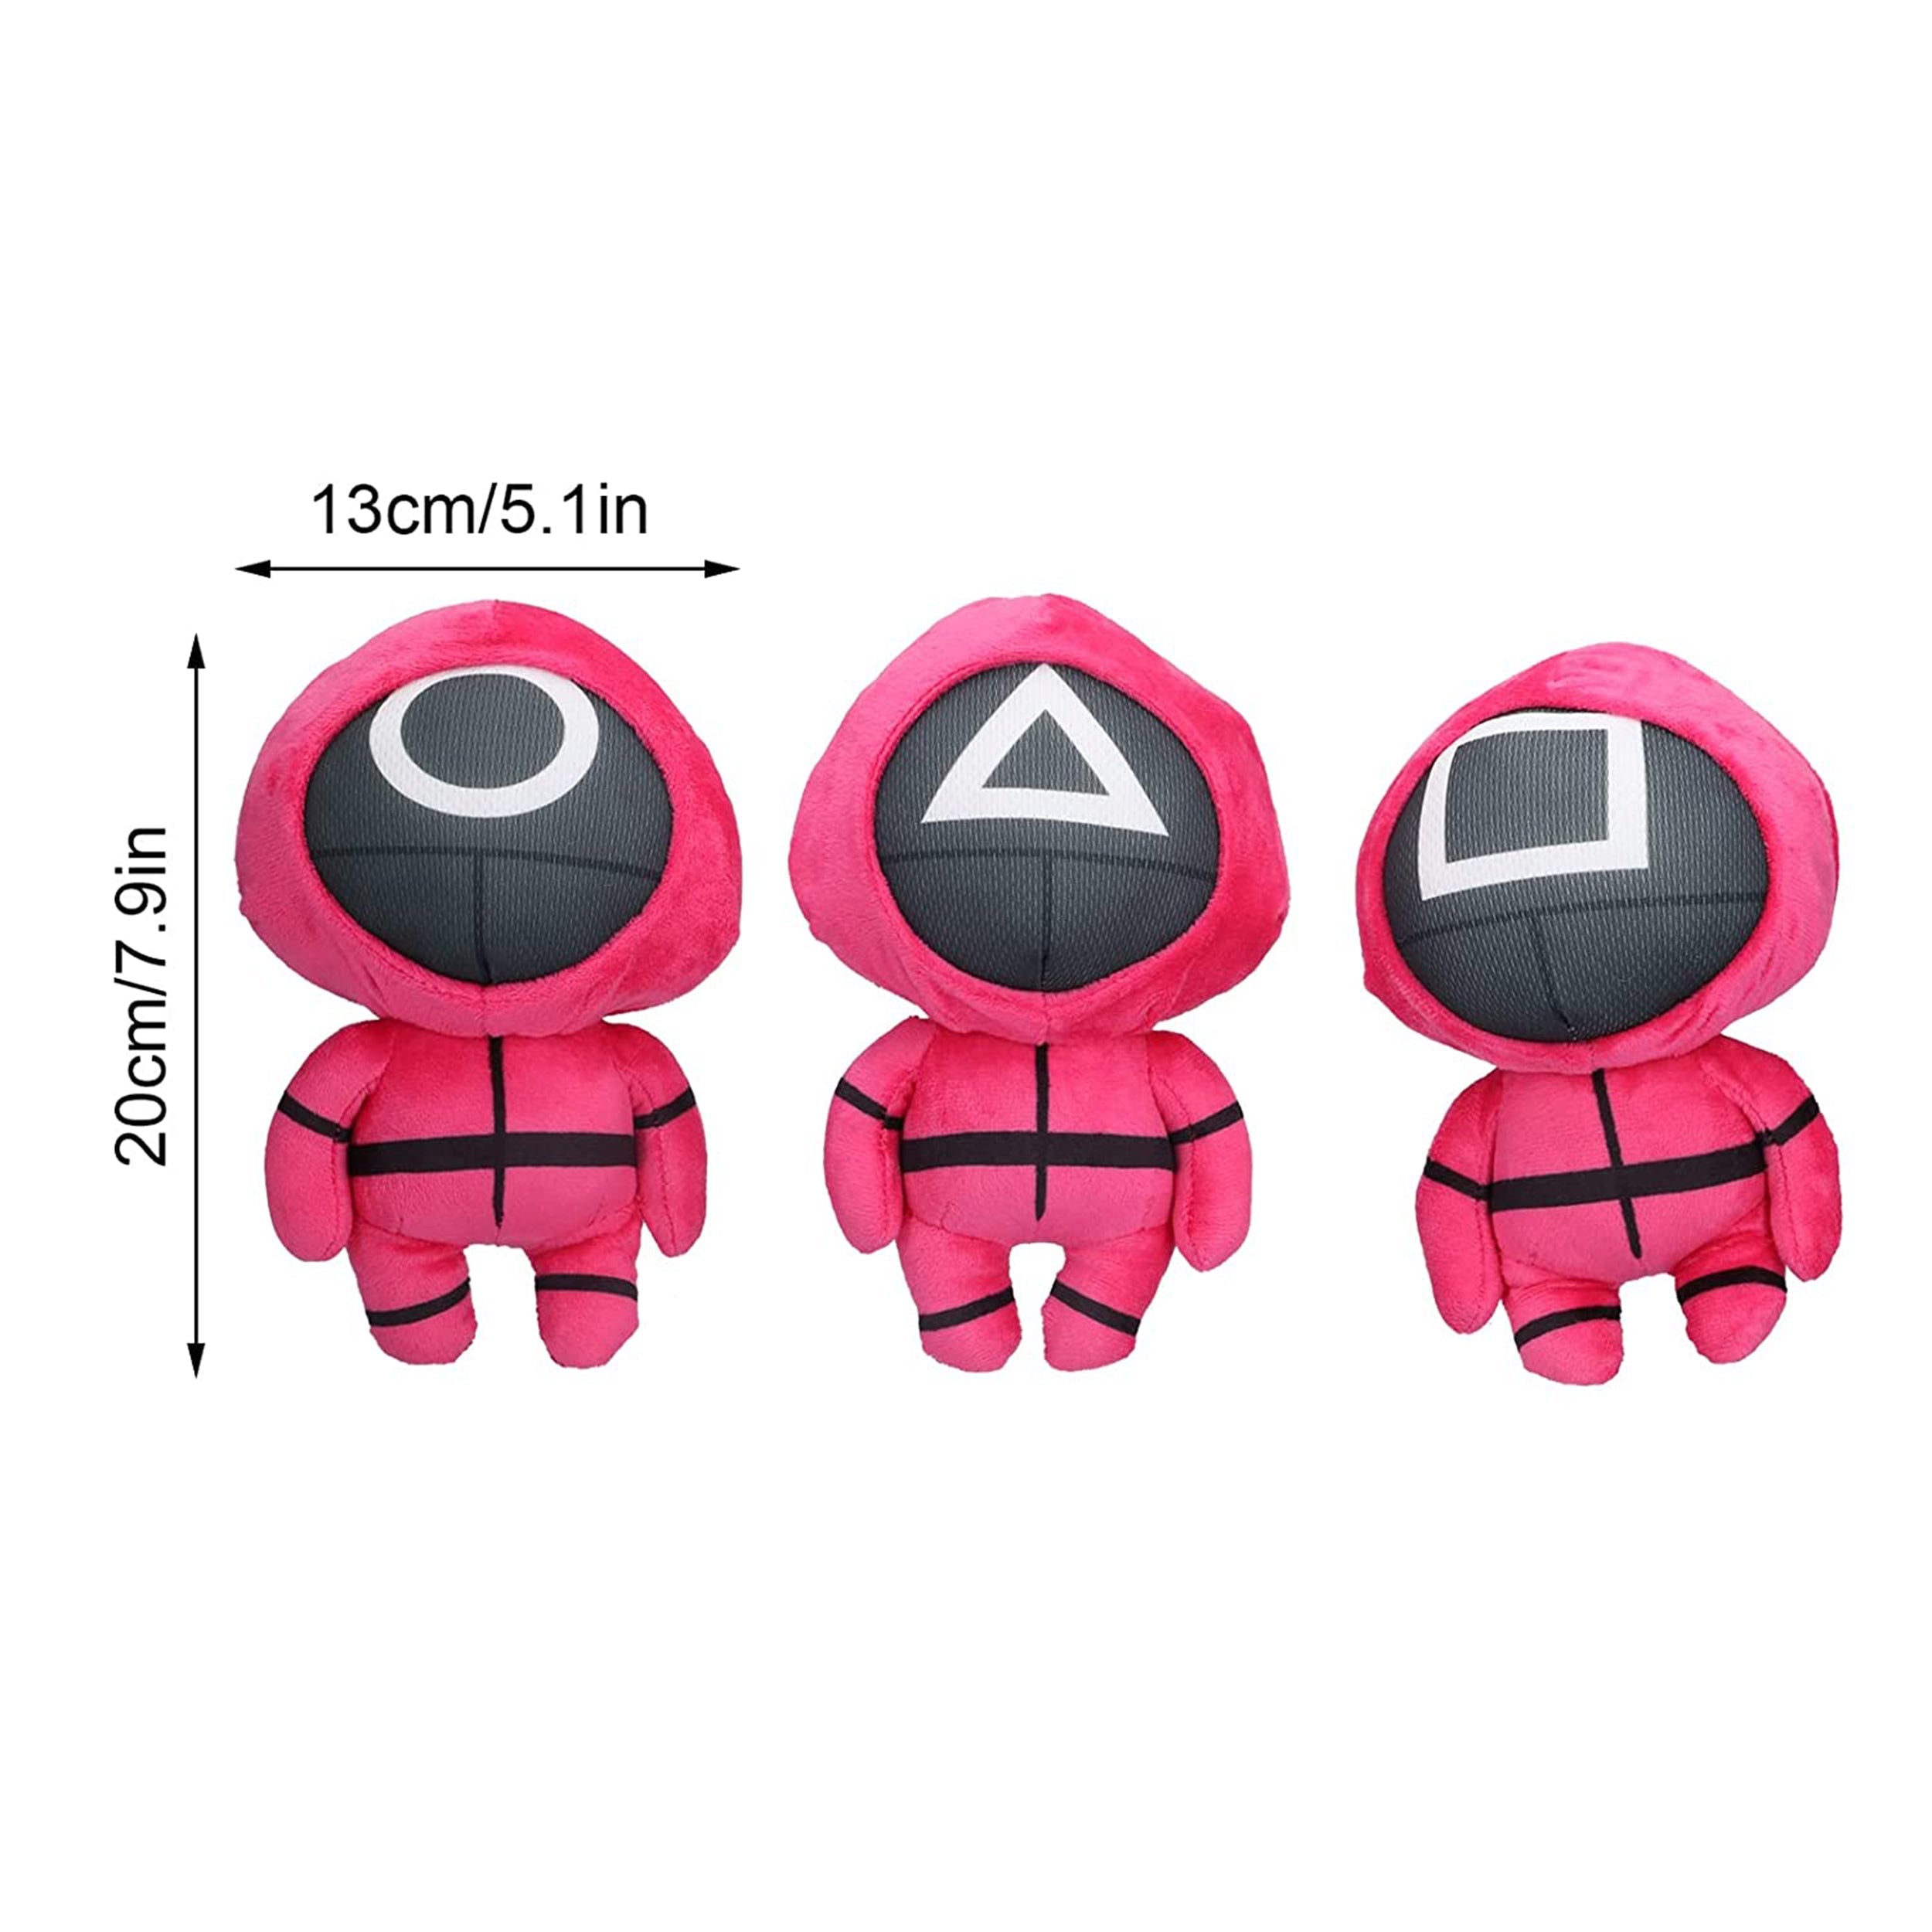 Dimensions Of Red Korean Game Plush Toy